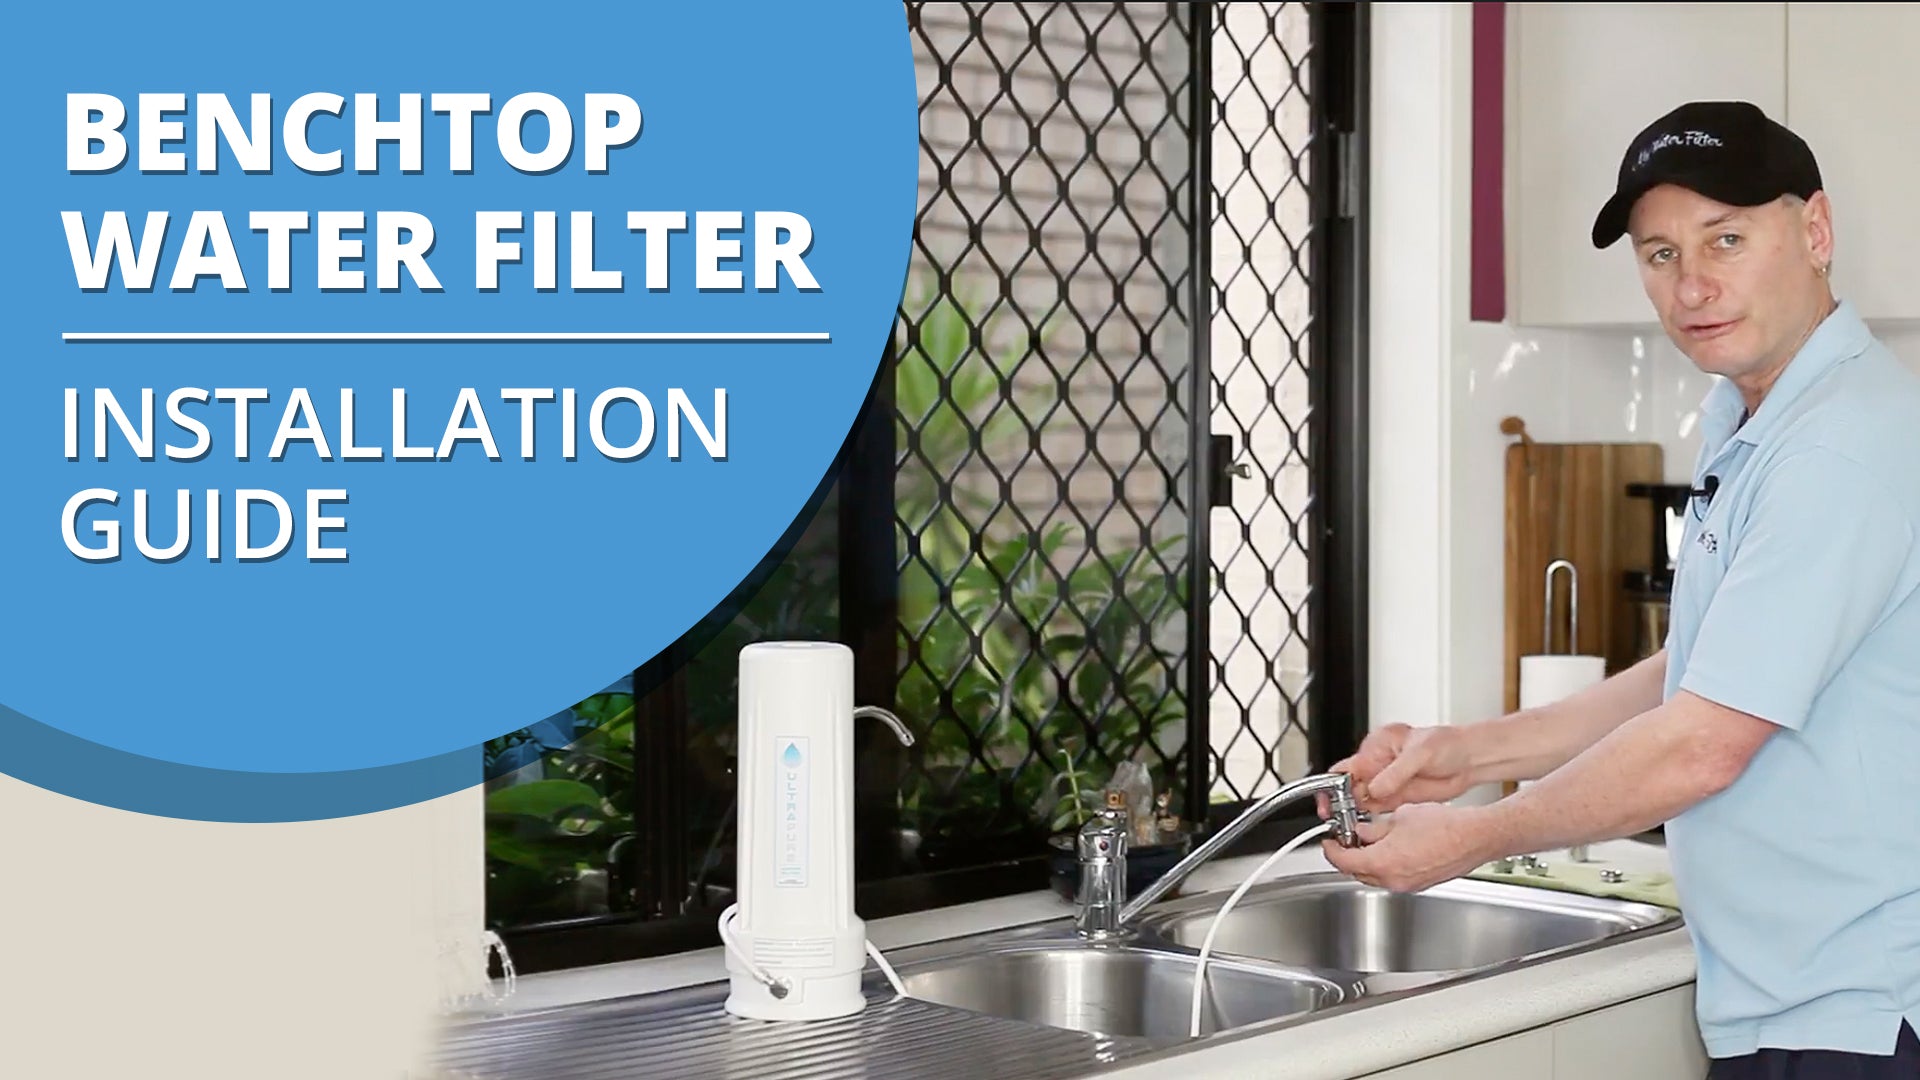 How And If You Can Install A Benchtop Water Filter [VIDEO]